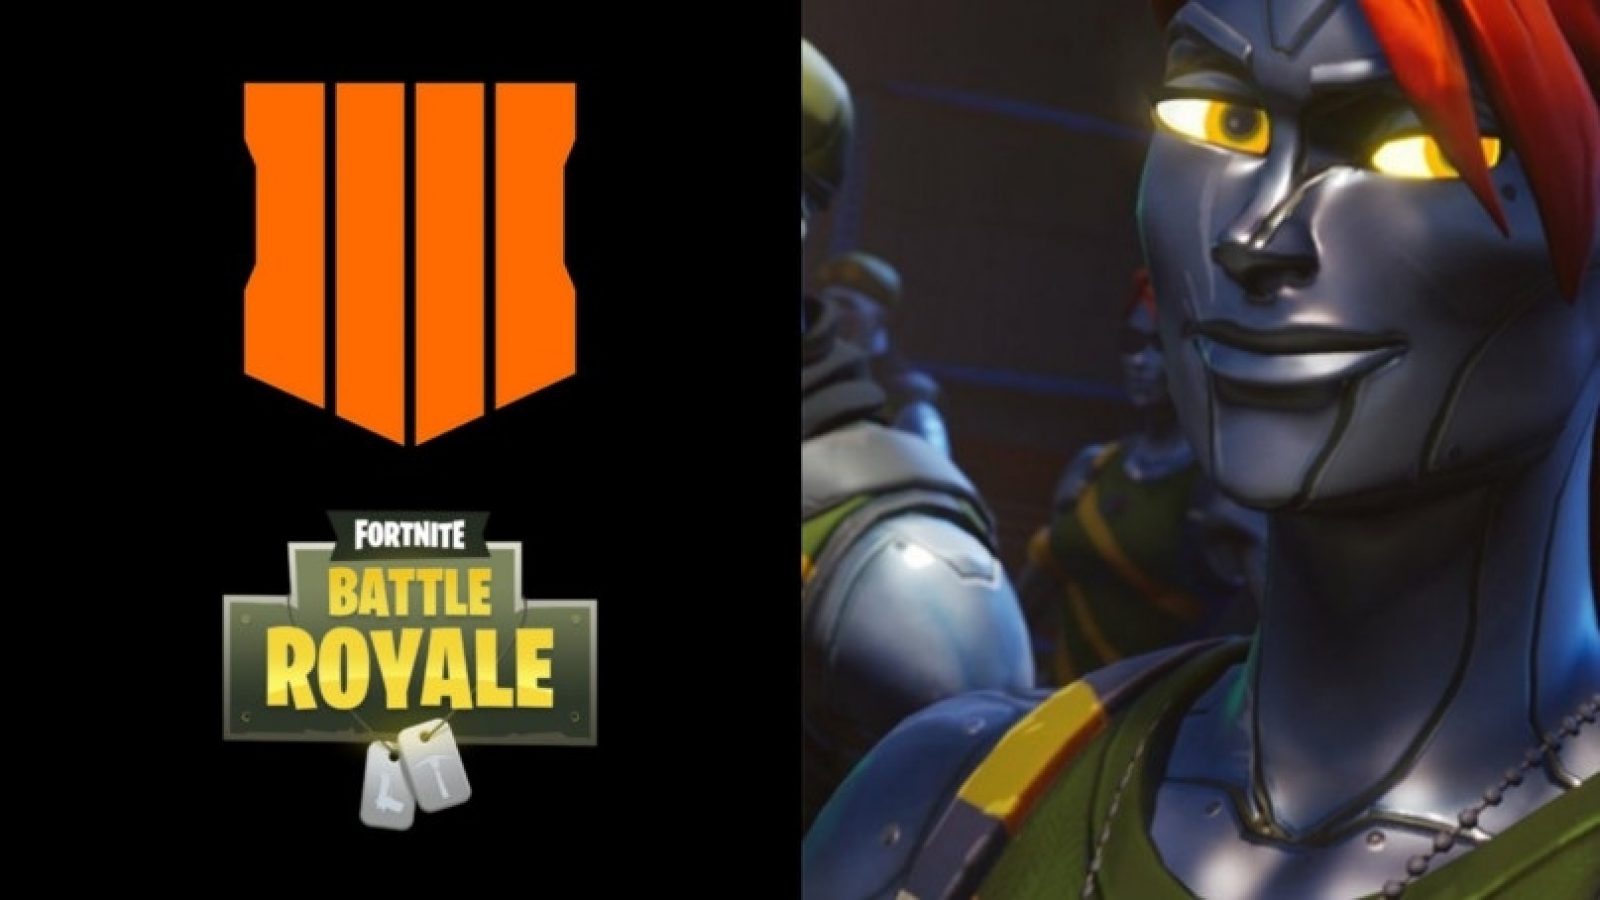 Image Tweeted By Fortnite Contains A Potential Teaser For